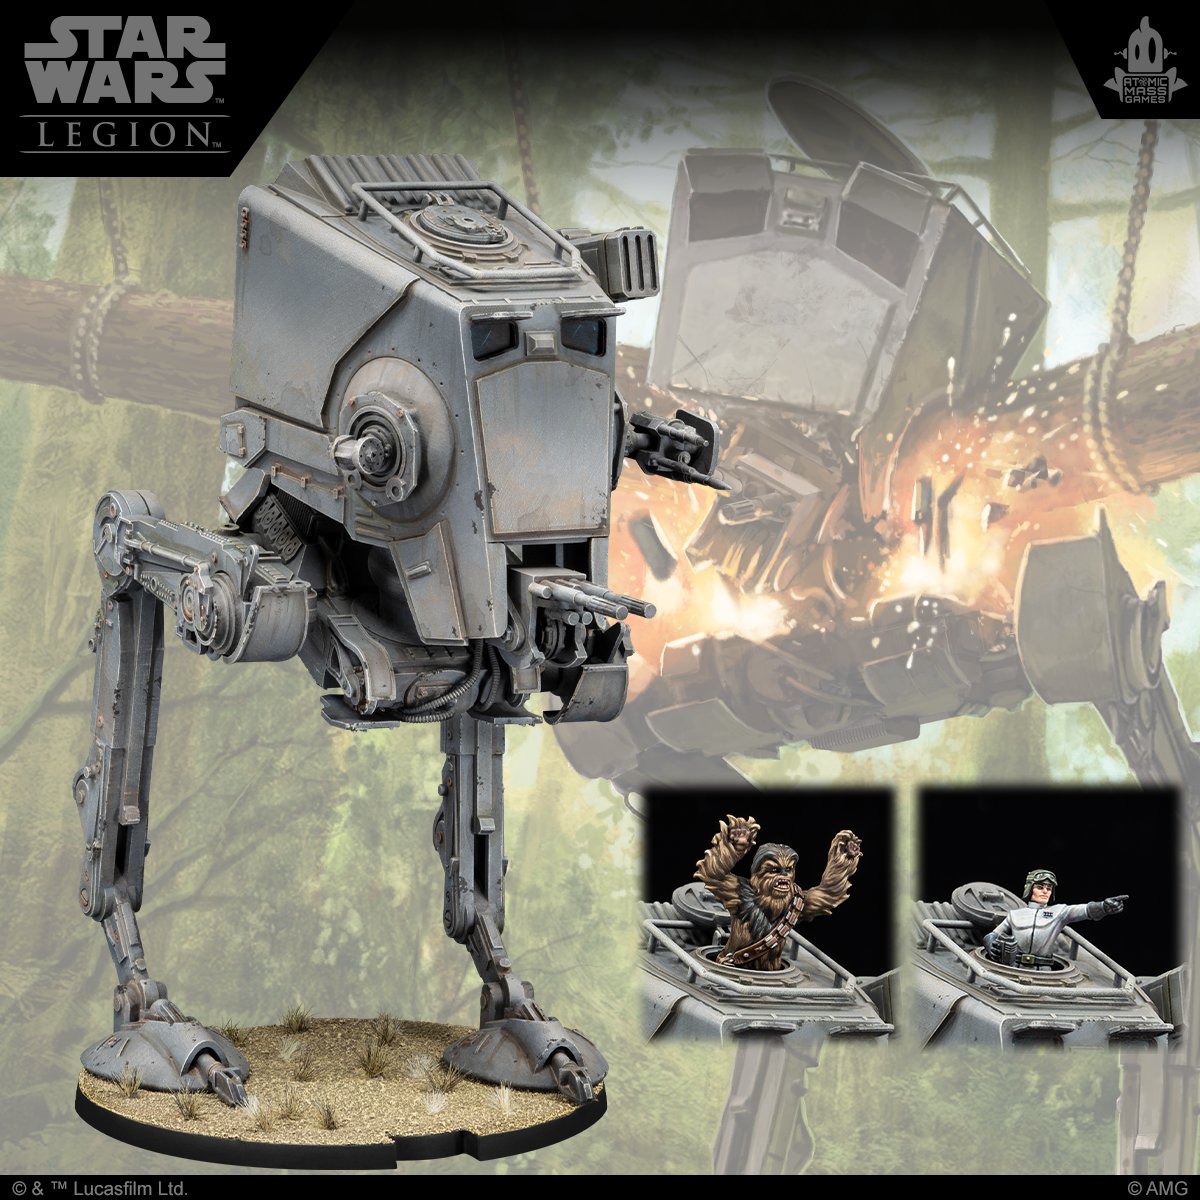 Yub nub! We are thrilled to welcome Wicket, Logray, the Ewok warriors of Bright Tree Village, and an Endor AT-ST - piloted by either Chewbacca or General Weiss - to STAR WARS: Legion.

shop.asmodee.com/star-wars-5-le…

shop.asmodee.com/star-wars-5-le…

shop.asmodee.com/star-wars-5-le…